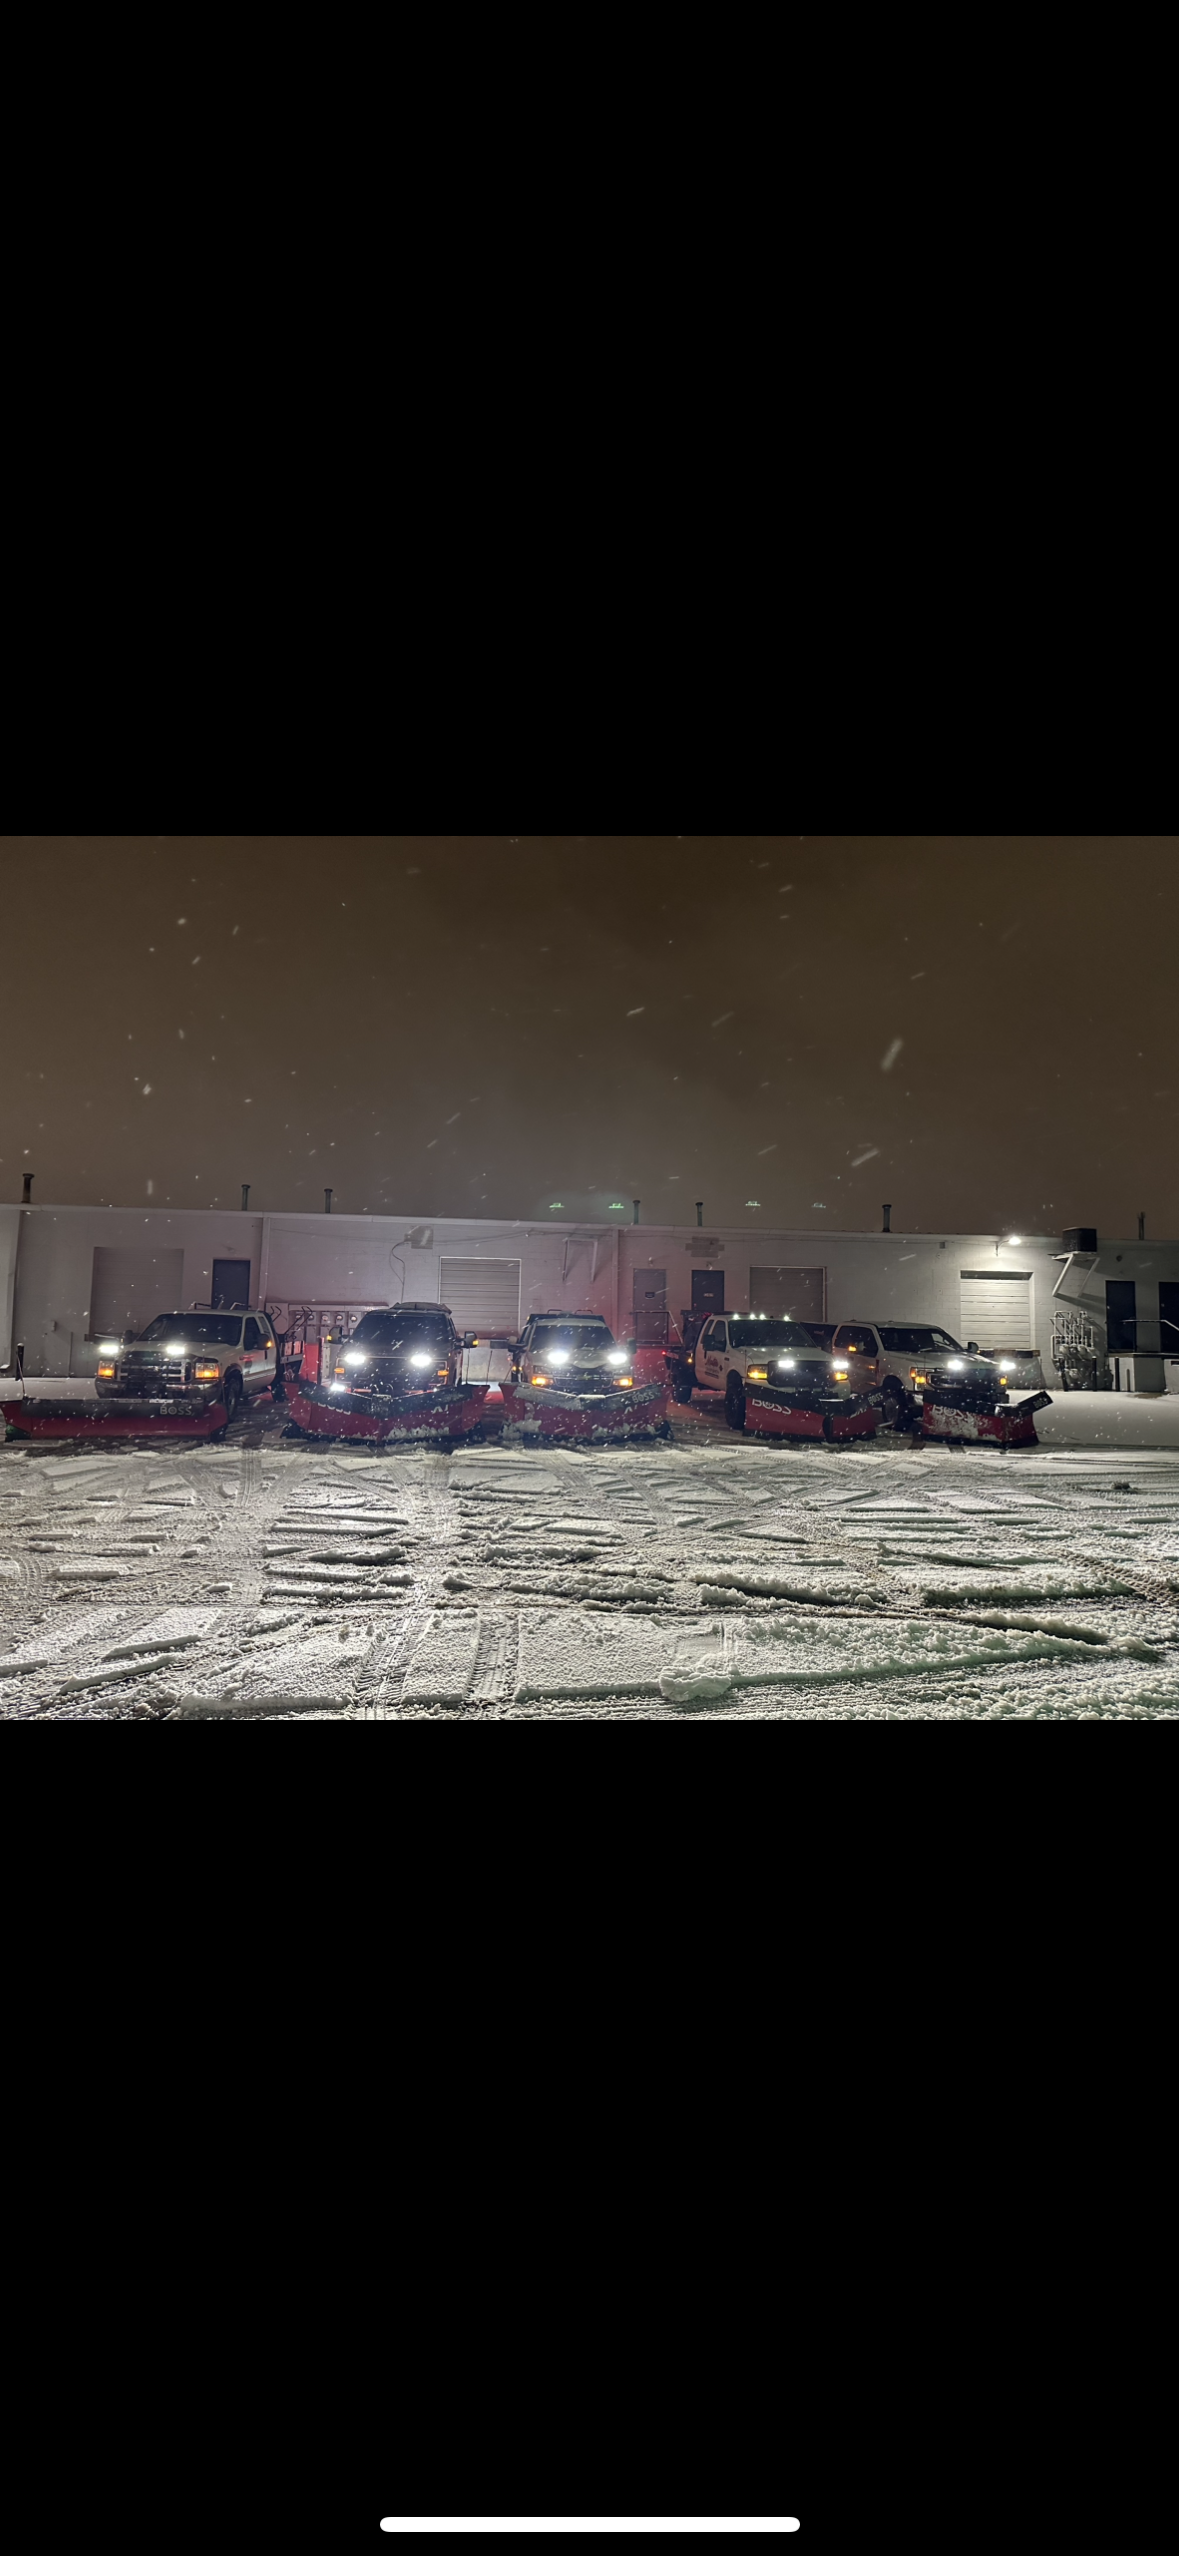 Company snow plowing vehicles